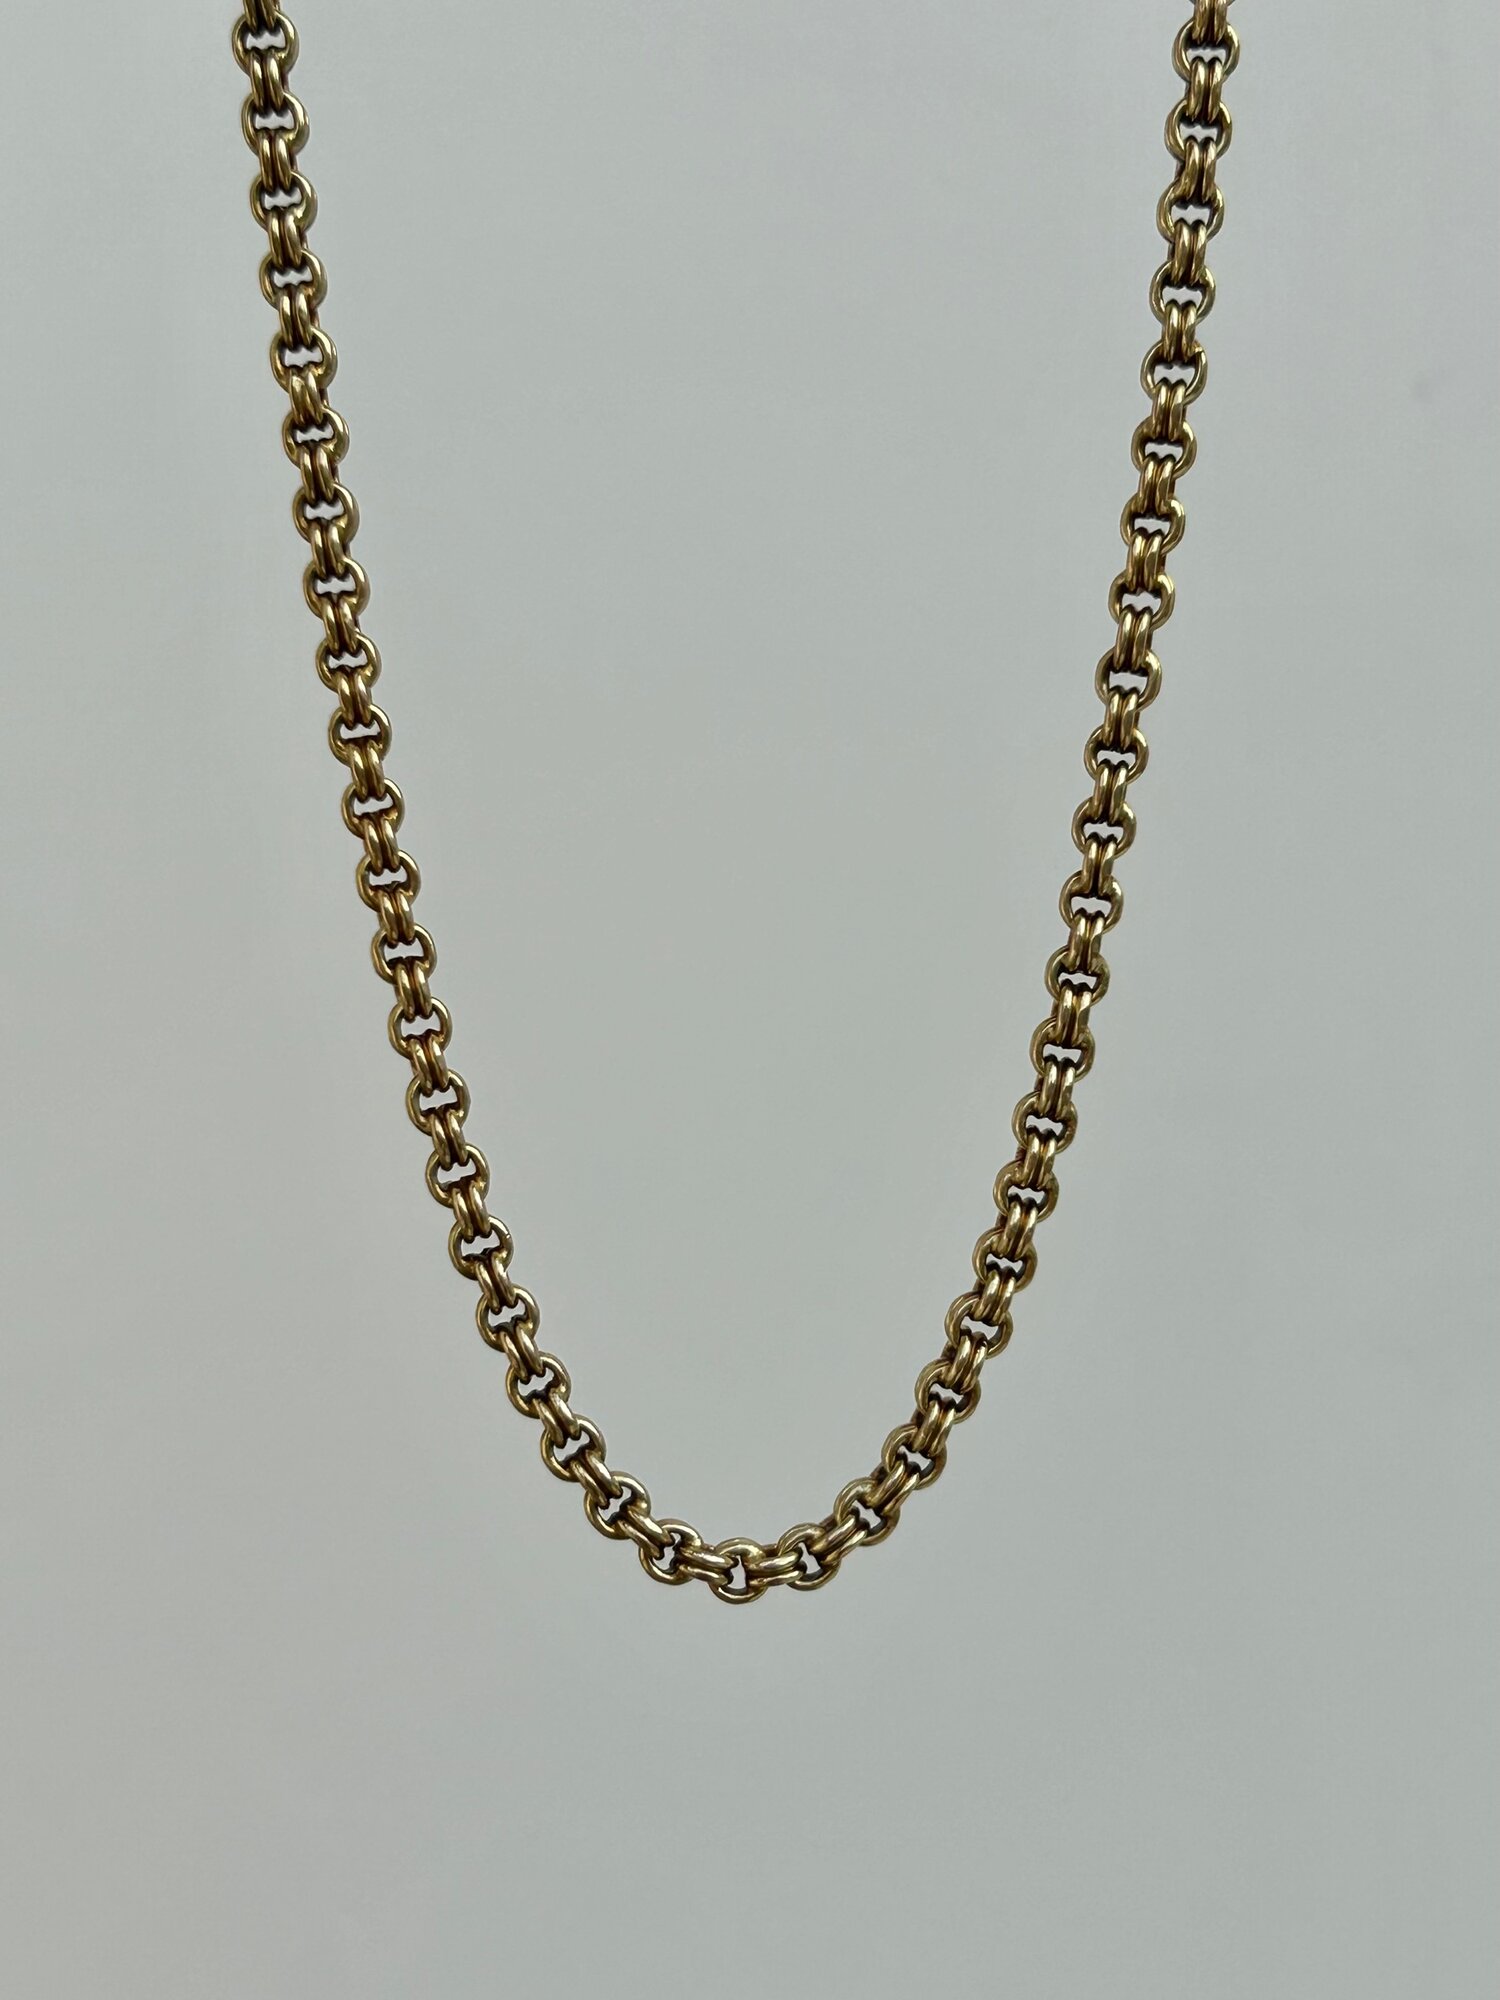 Antique Chunky 15ct Gembank1973 Gold with Clasp — Rope Yellow Chain Barrel